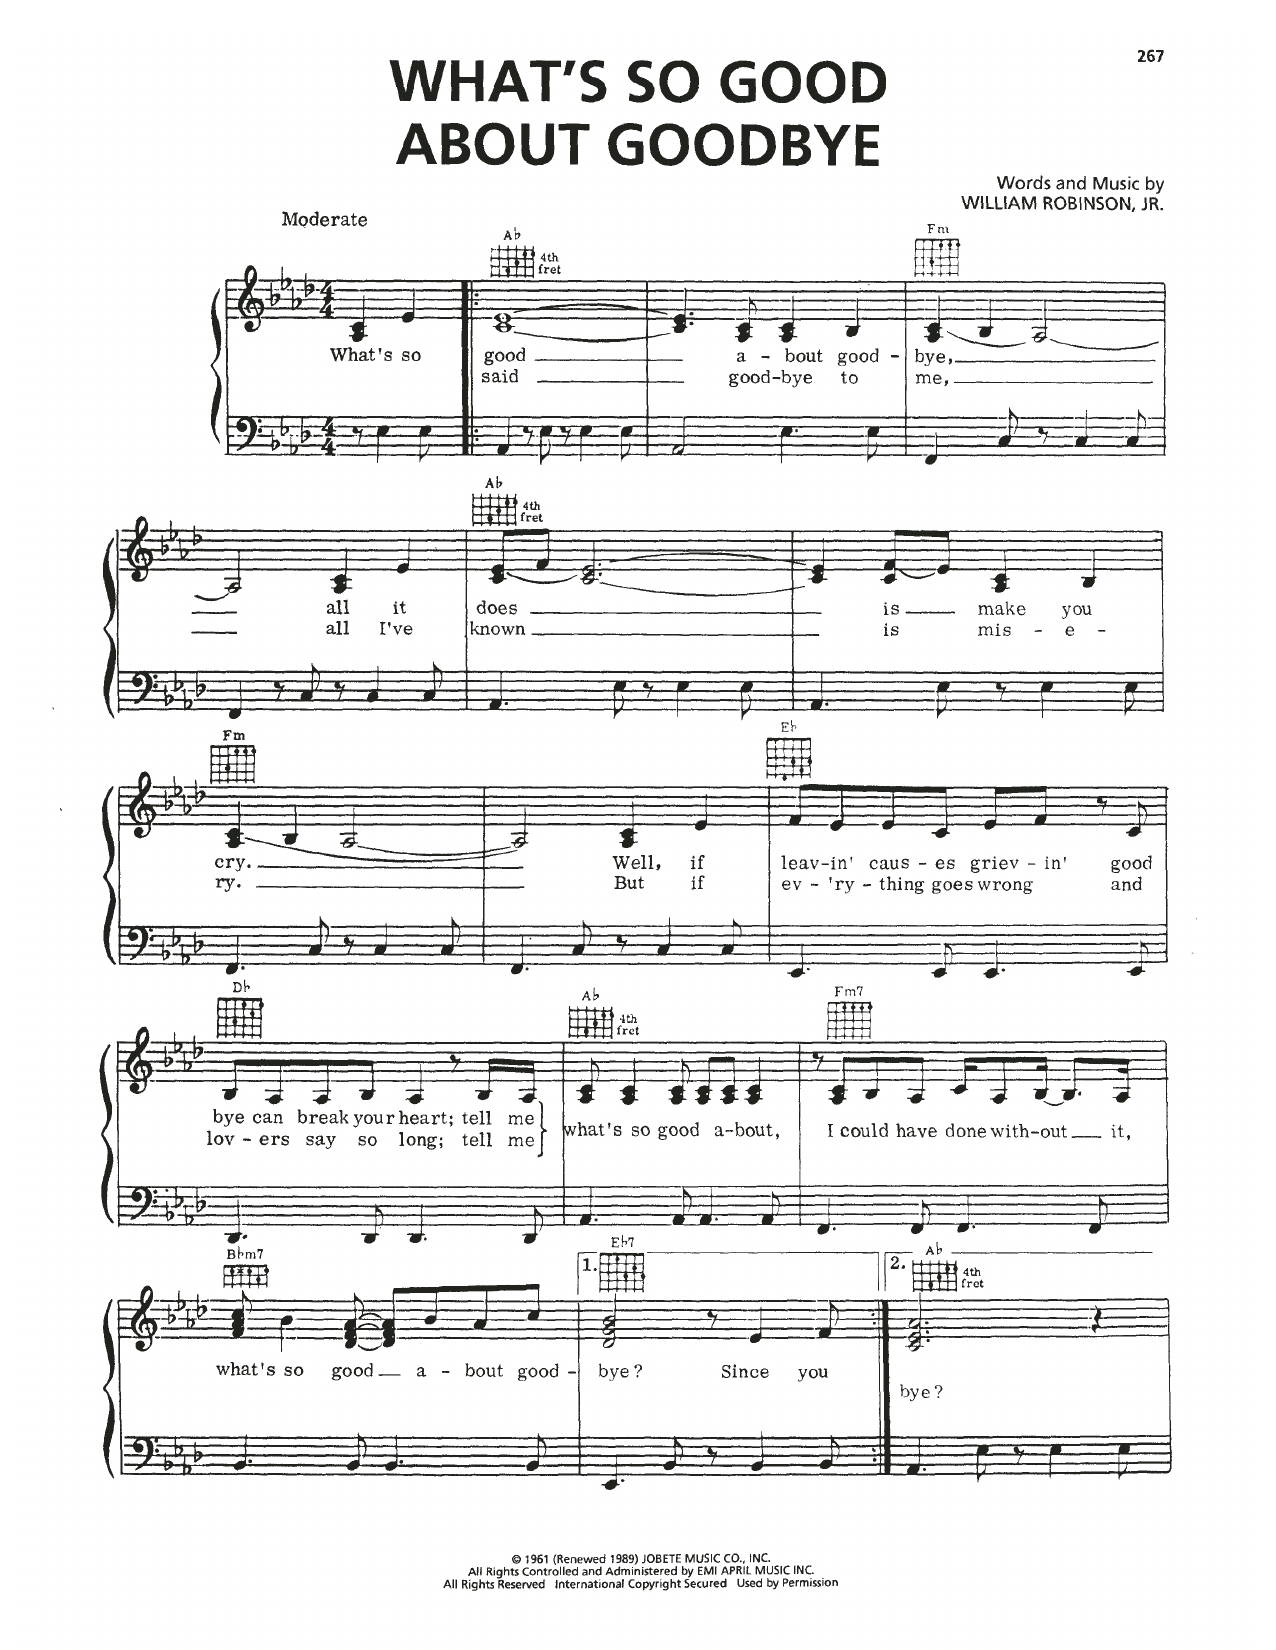 Download The Temptations What's So Good About Goodbye Sheet Music